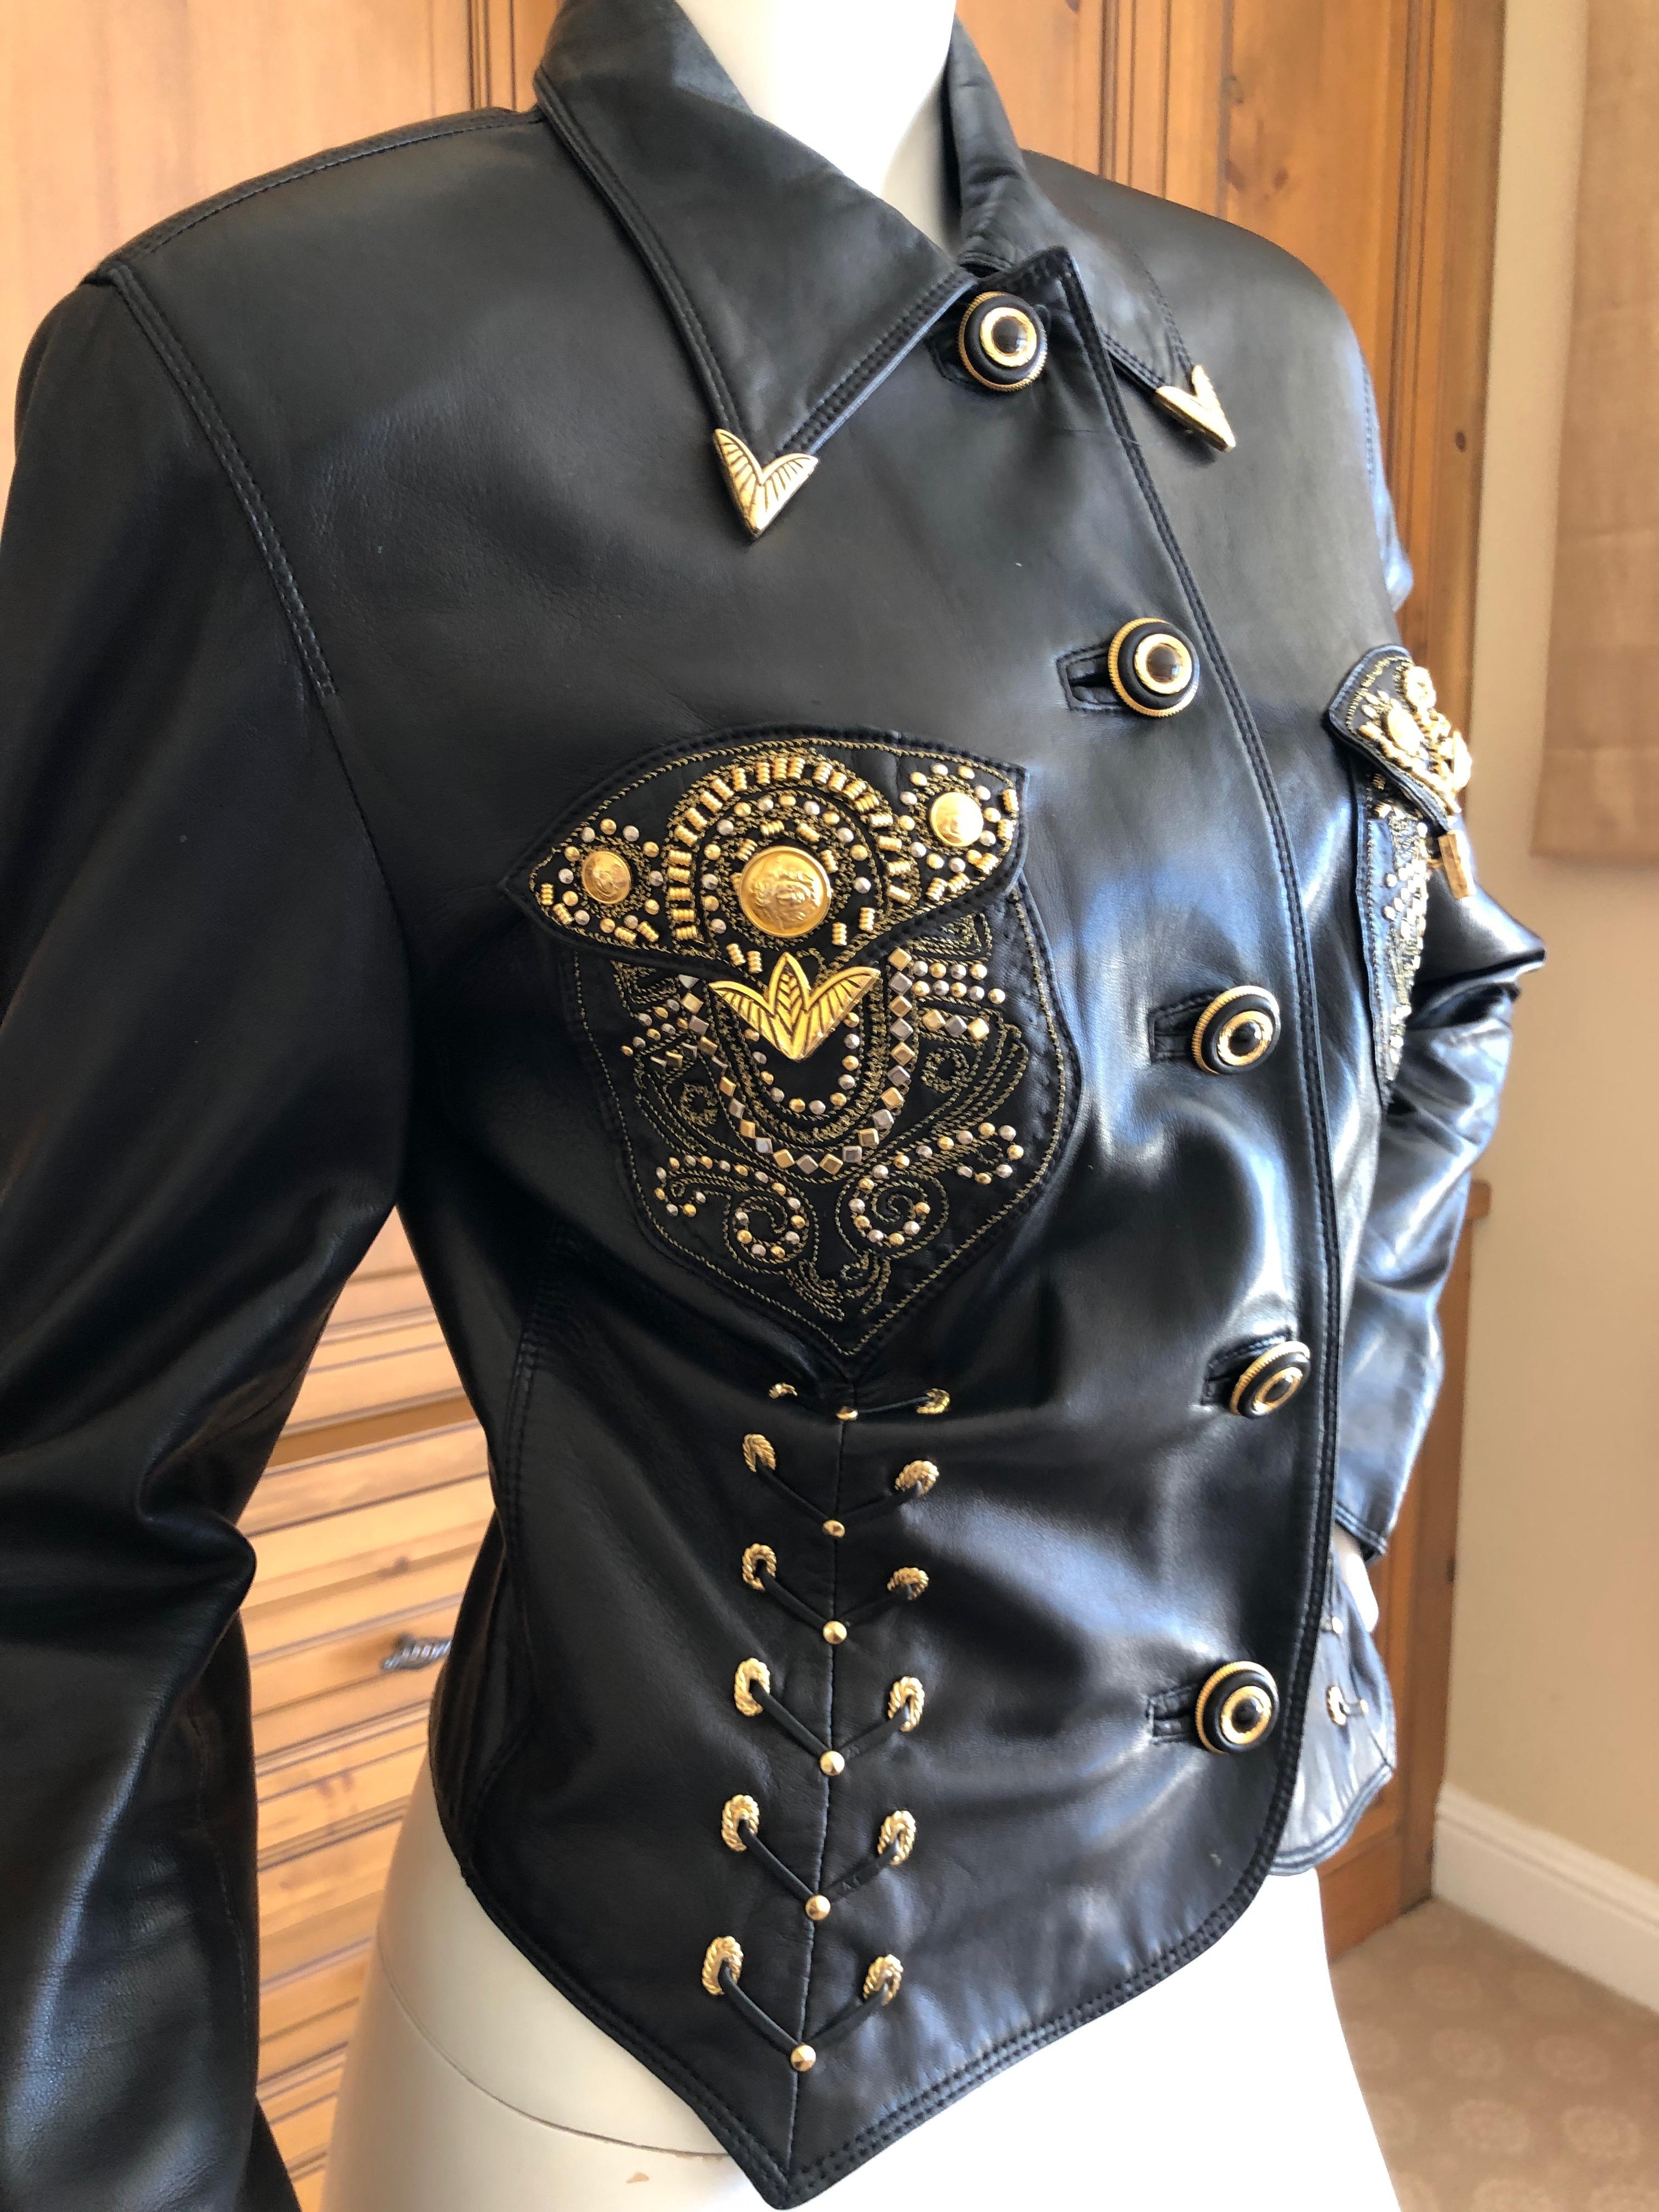 Gianni Versace 1990 Lambskin Leather Moto Jacket with Gold Embellishment In Excellent Condition For Sale In Cloverdale, CA